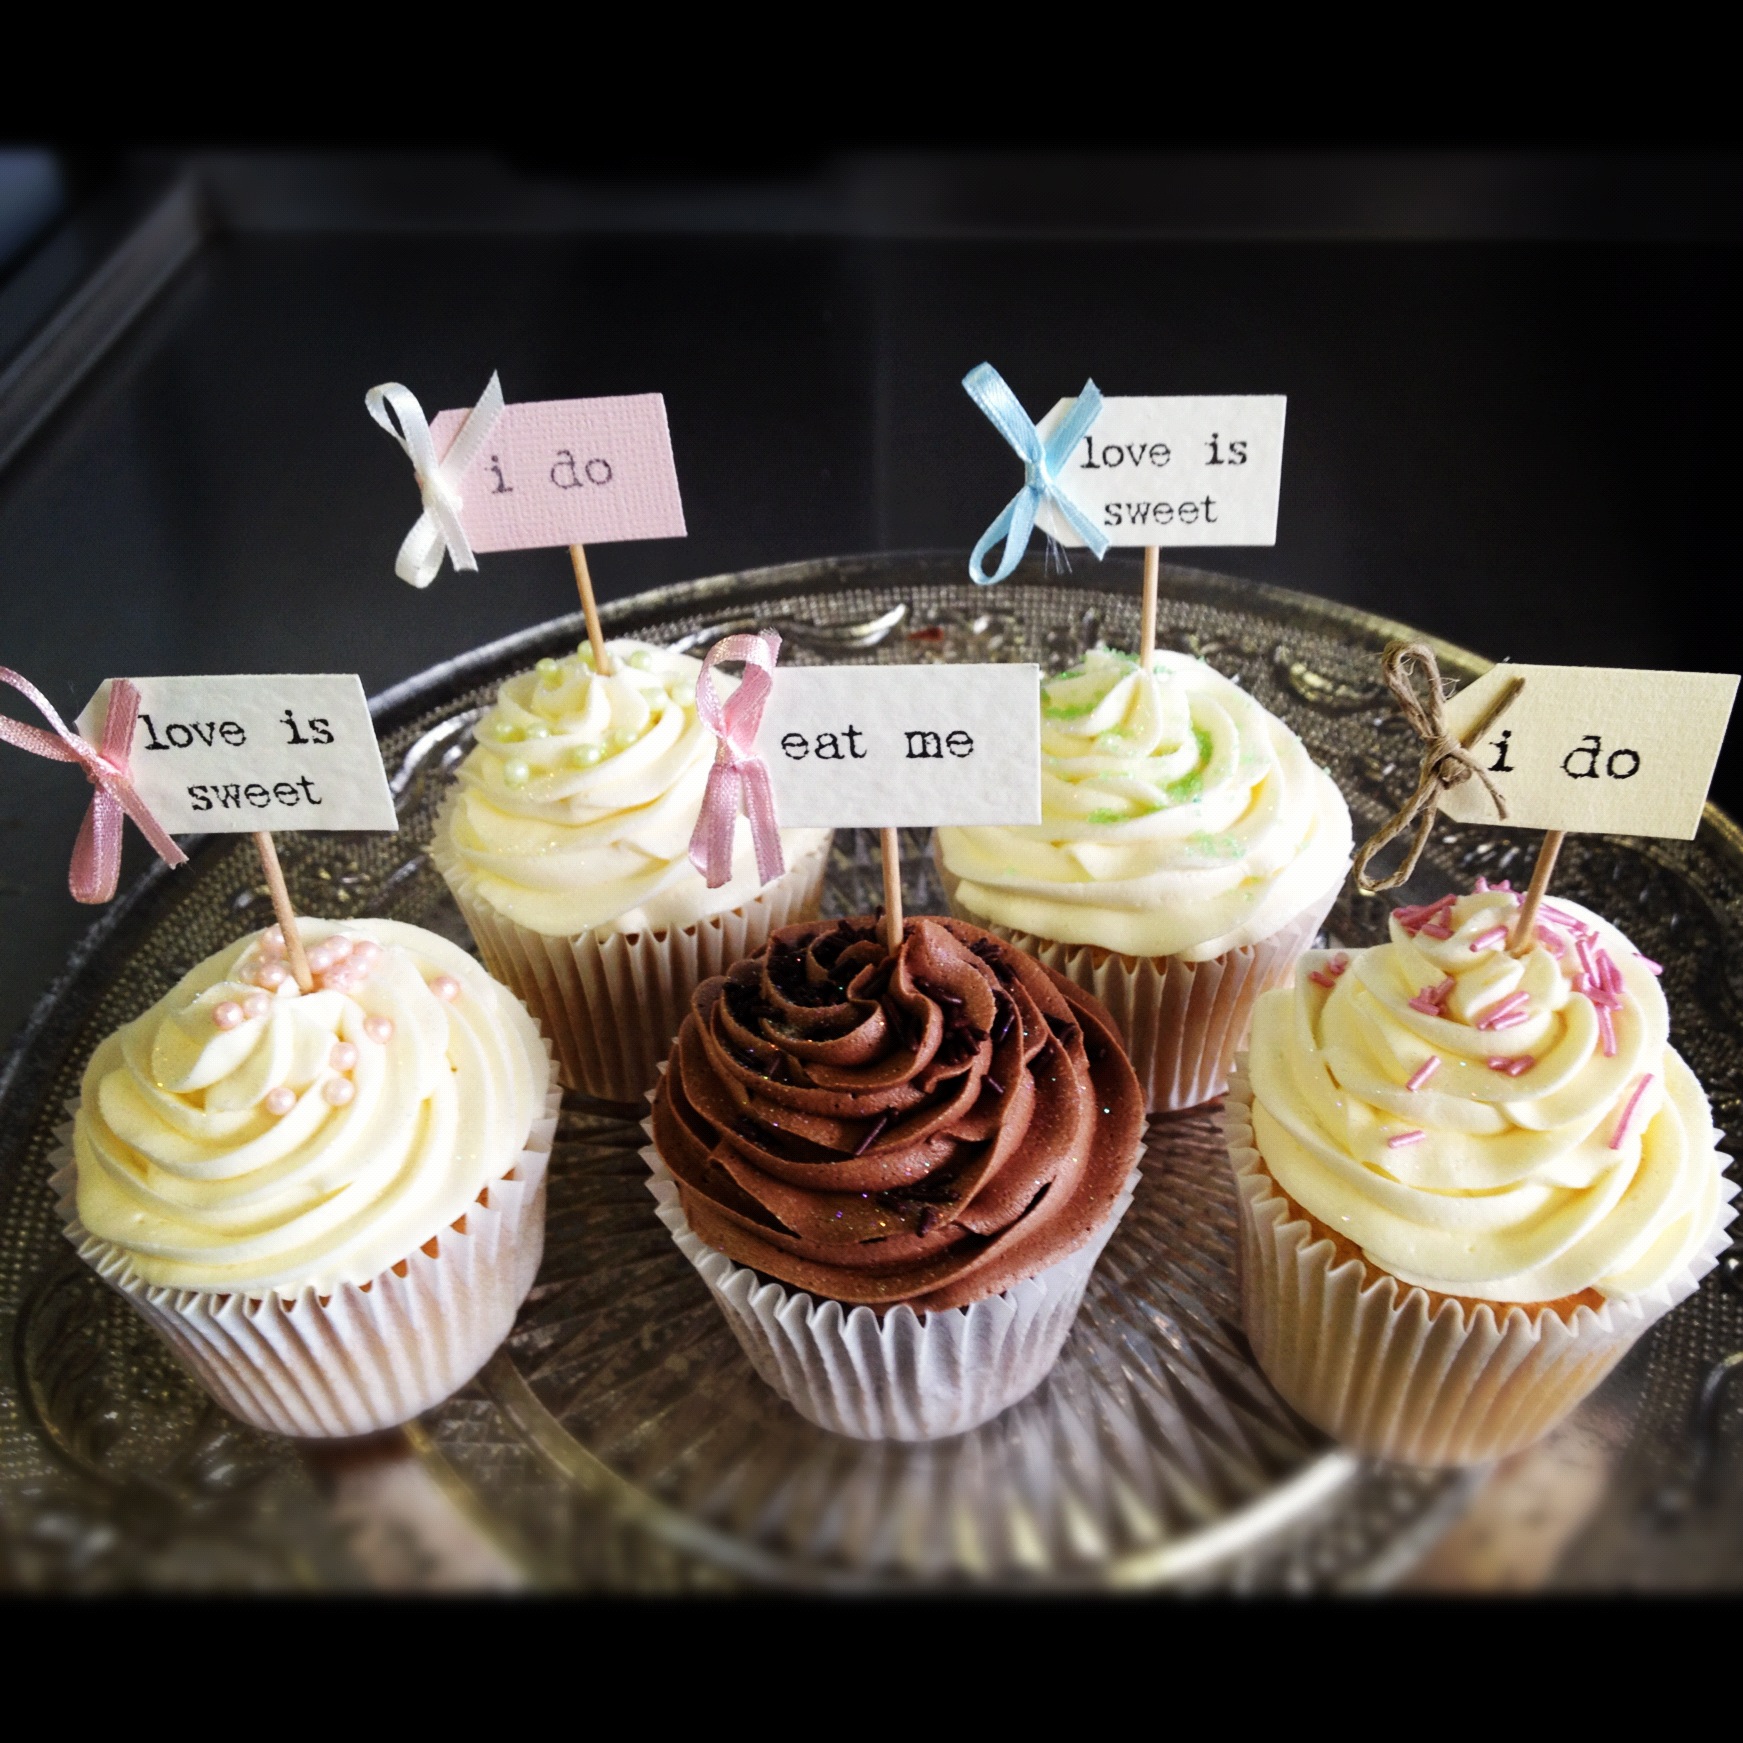 london vintage wedding with flags cupcakes cupcakes ruffle flags wedding pink  cupcakes wedding with